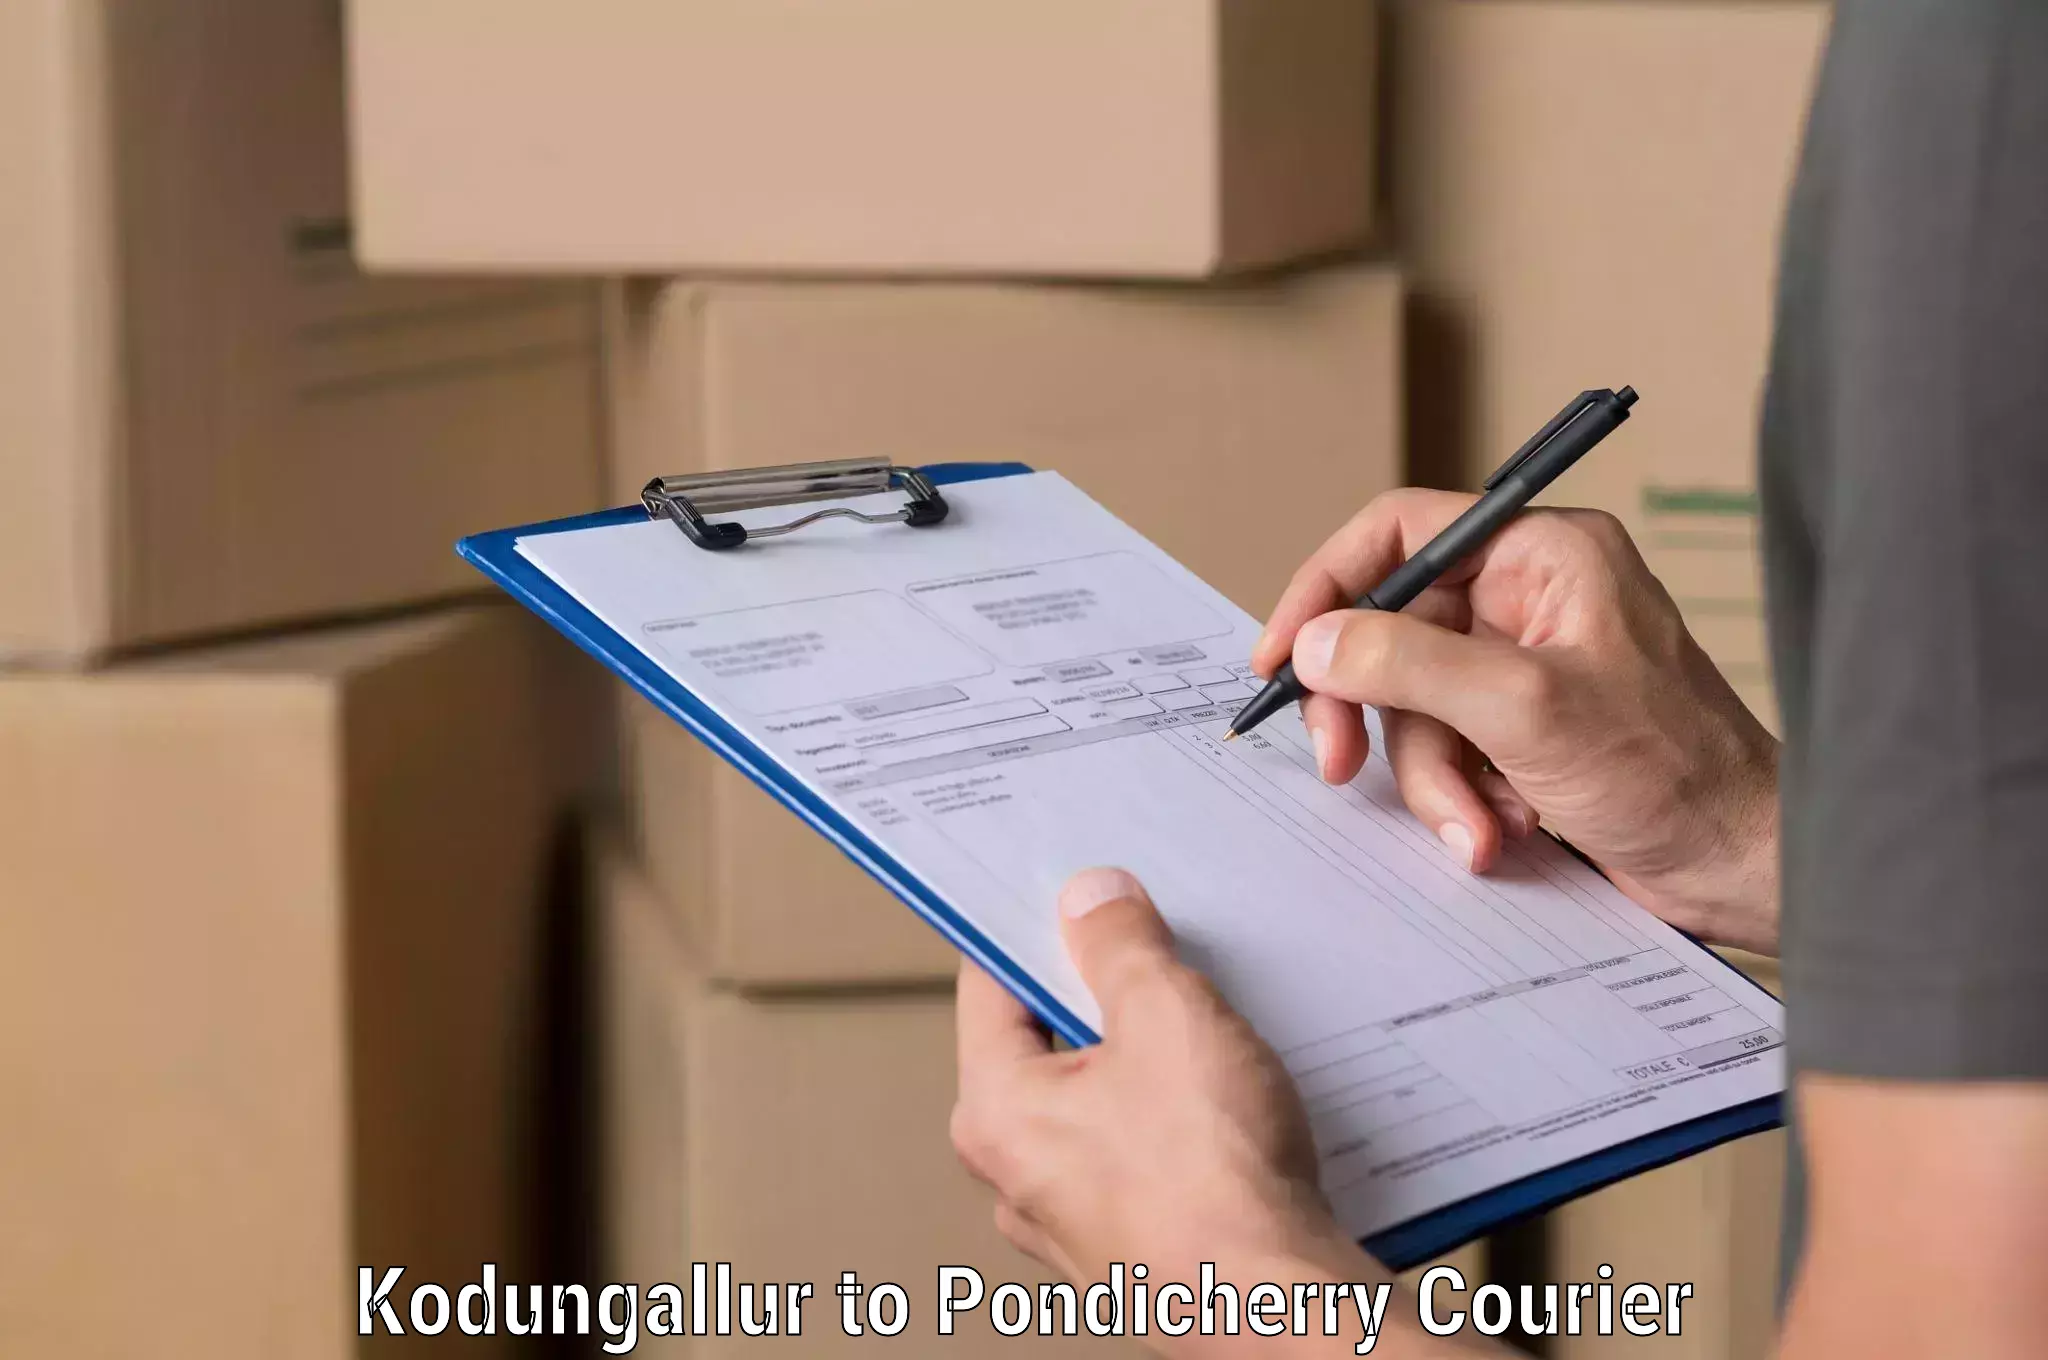 Enhanced delivery experience Kodungallur to Pondicherry